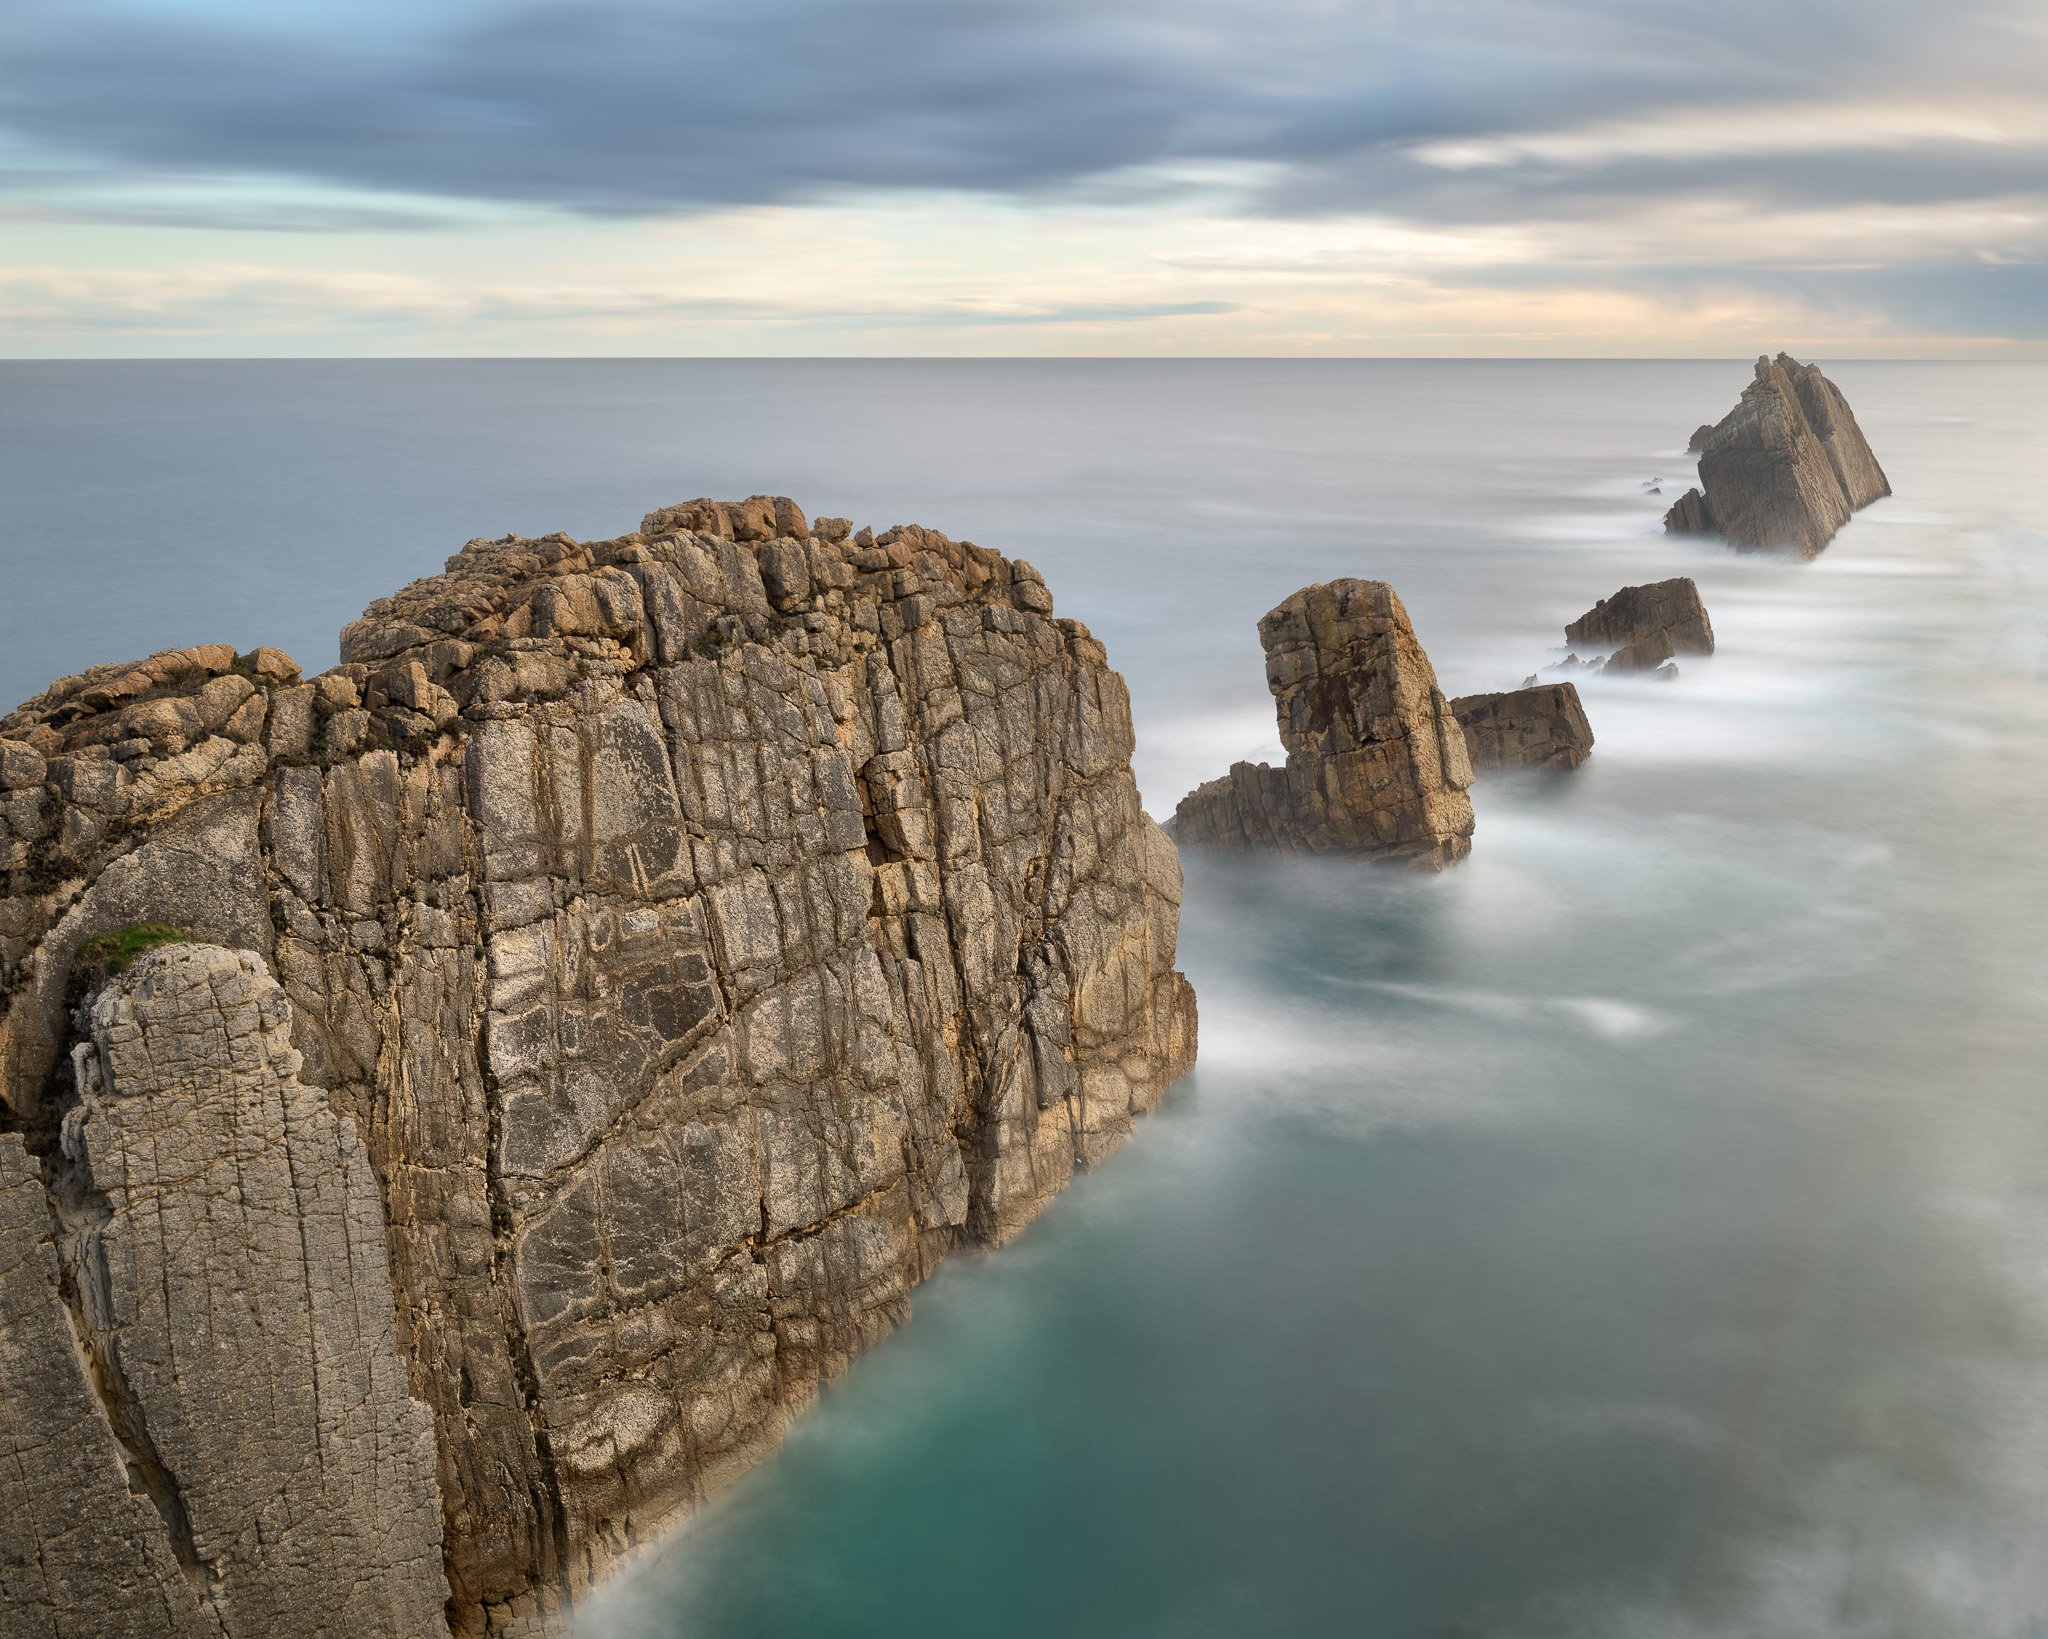 atlantic, beach, blue, cantabria, cantabrian, cliff, clouds, coast, coastline, dawn, dramatic, europe, foam, formation, fracture, geology, island, islet, landmark, landscape, liencres, limestone, magnificent, minimalism, morning, nature, ocean, overcast, , Andrey Omelyanchuk